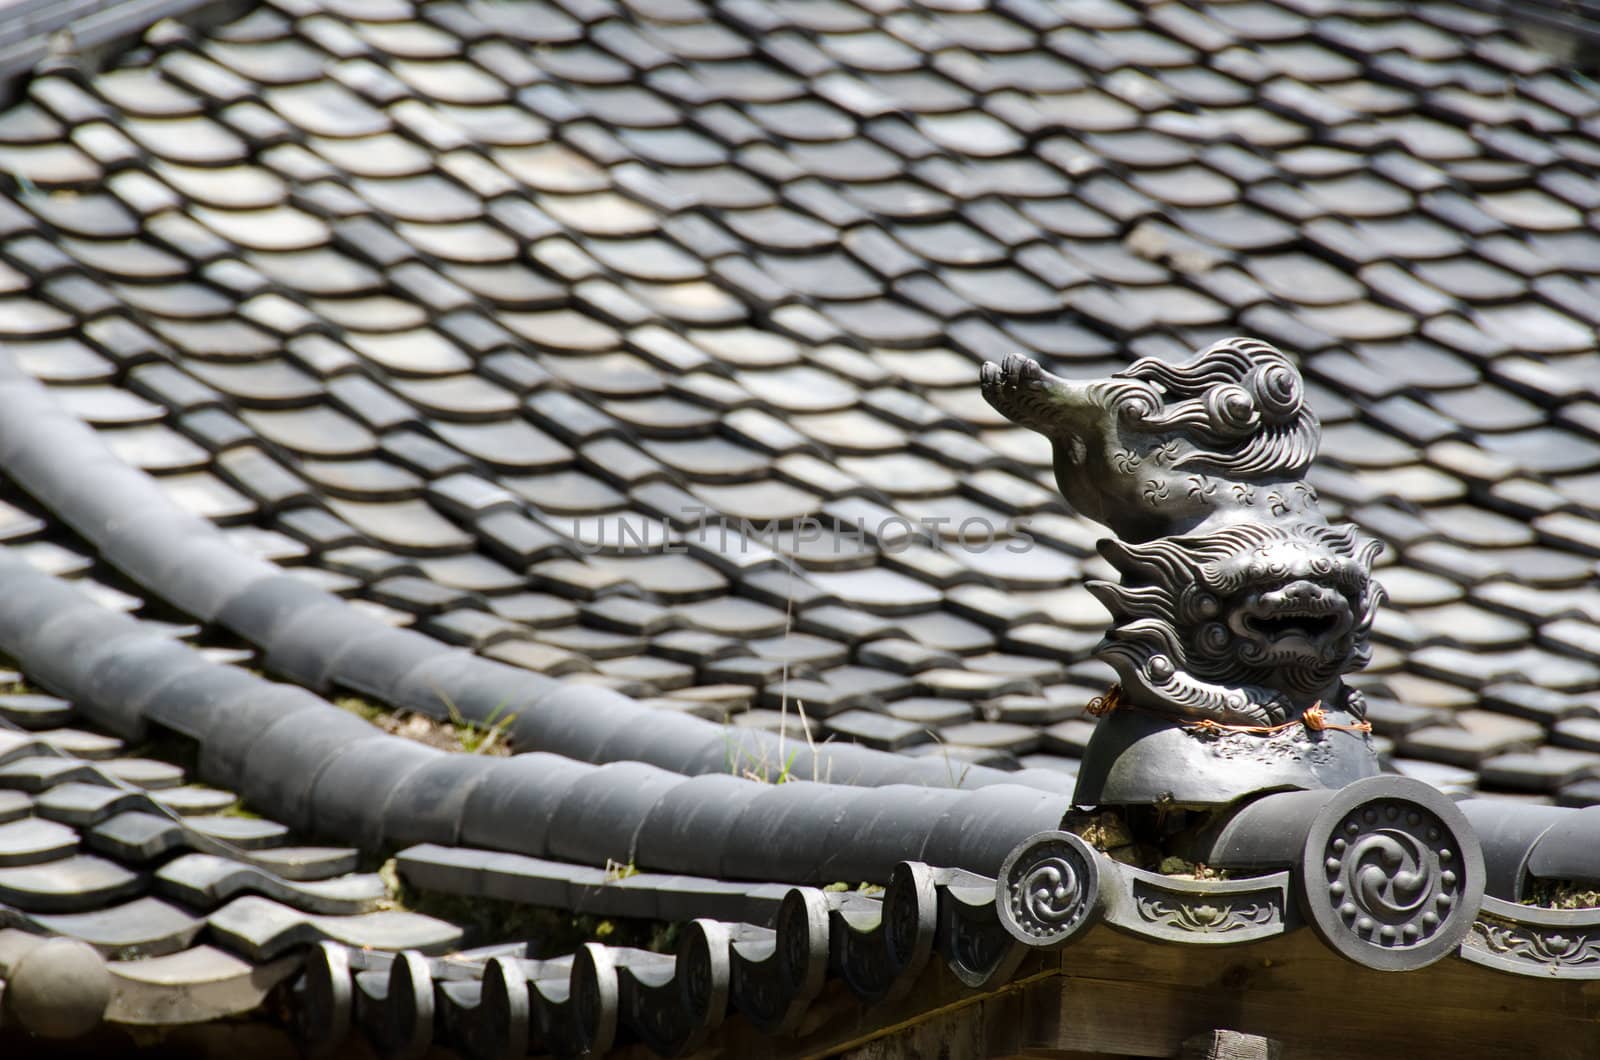 Roof of a japanese temple by Arrxxx